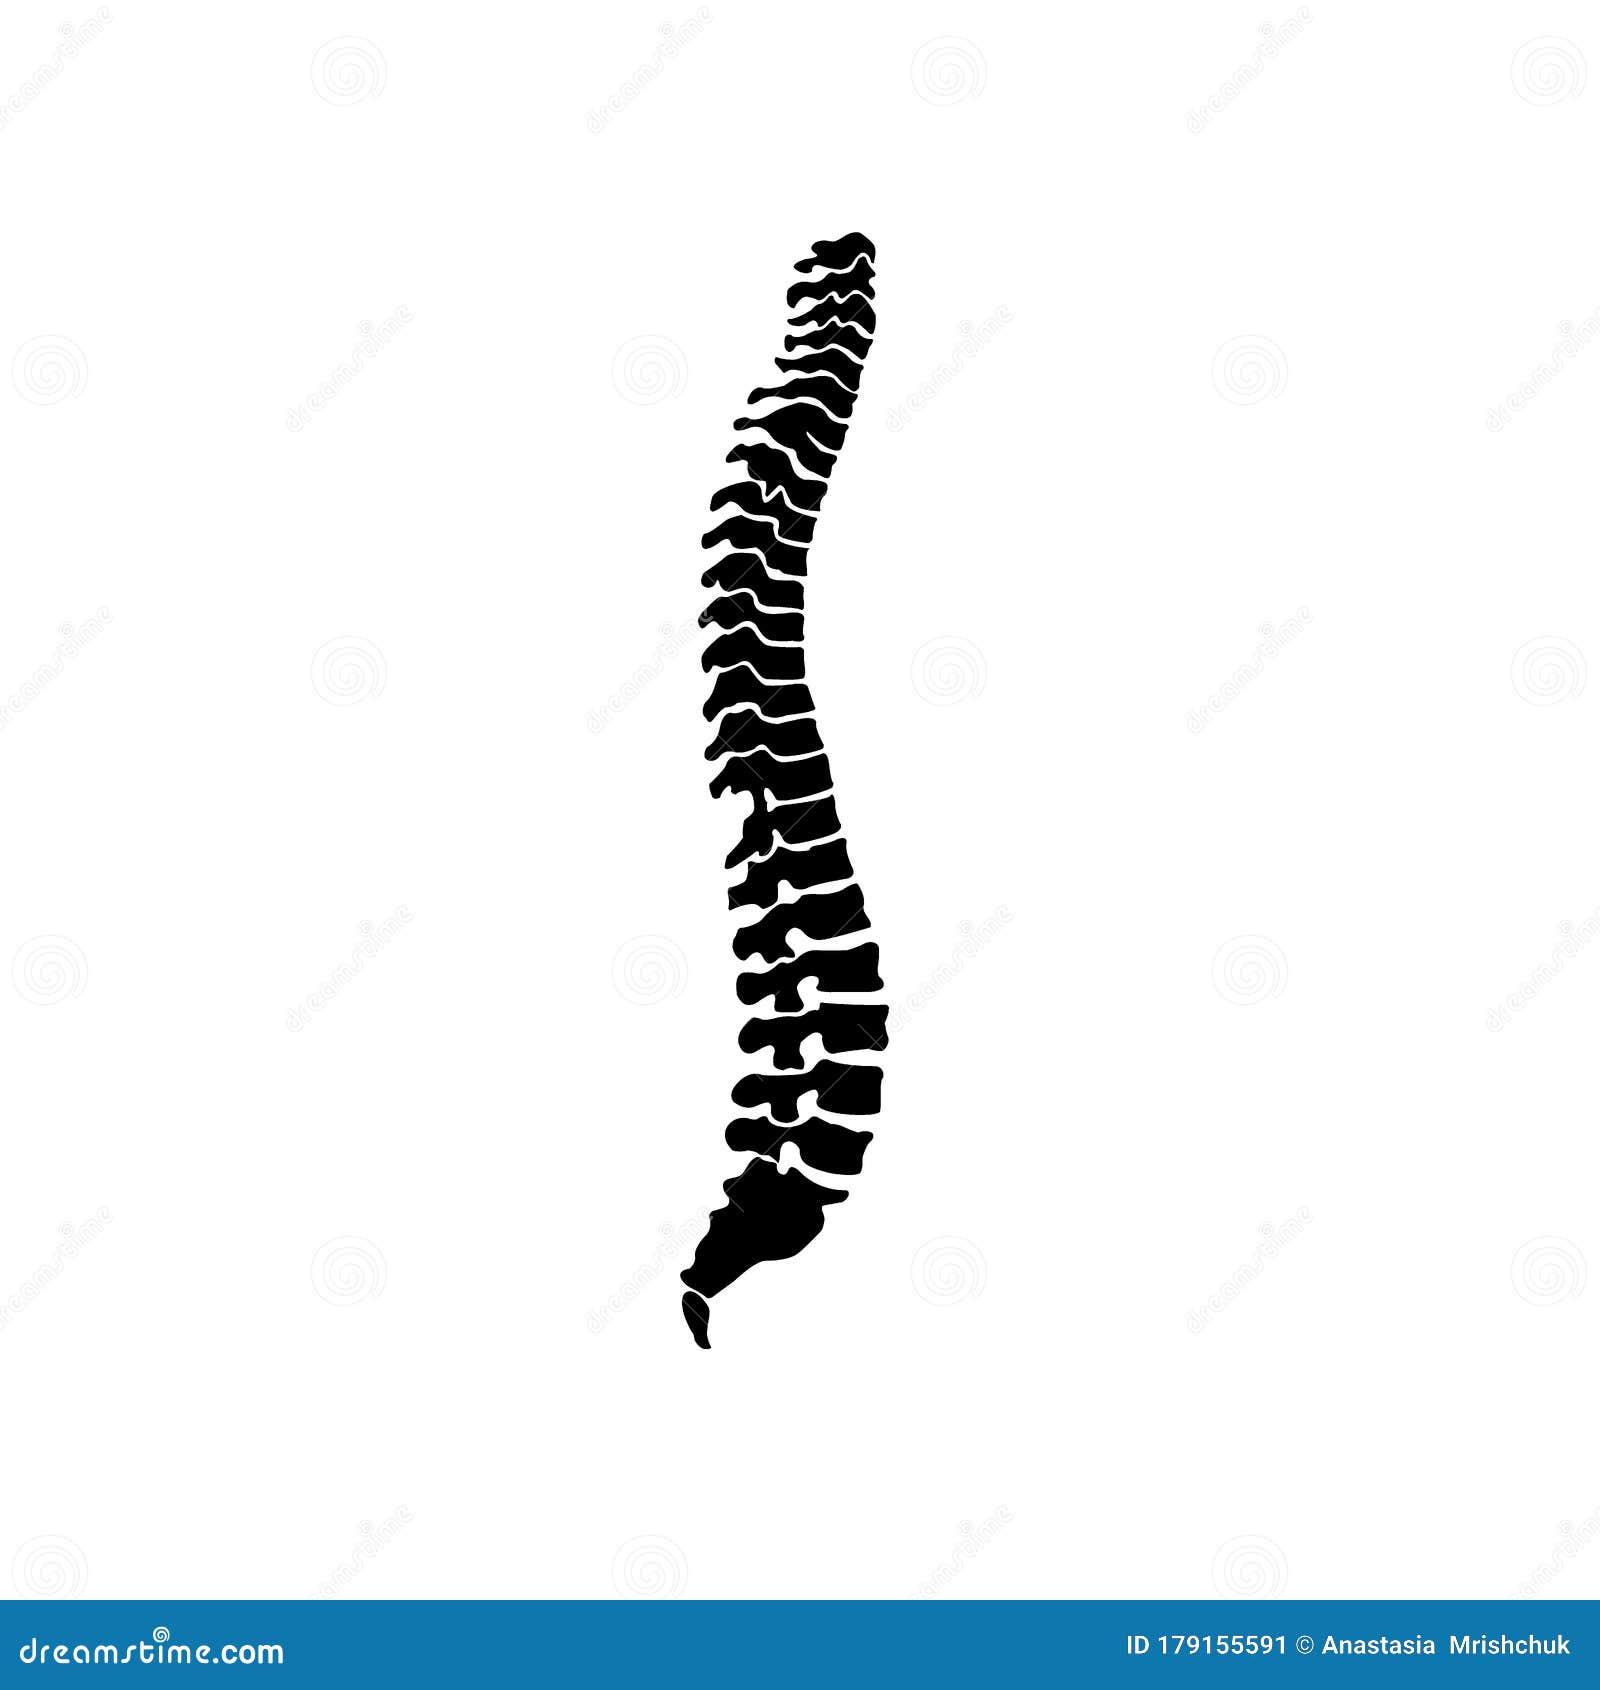 spine icon silhouette  on white background